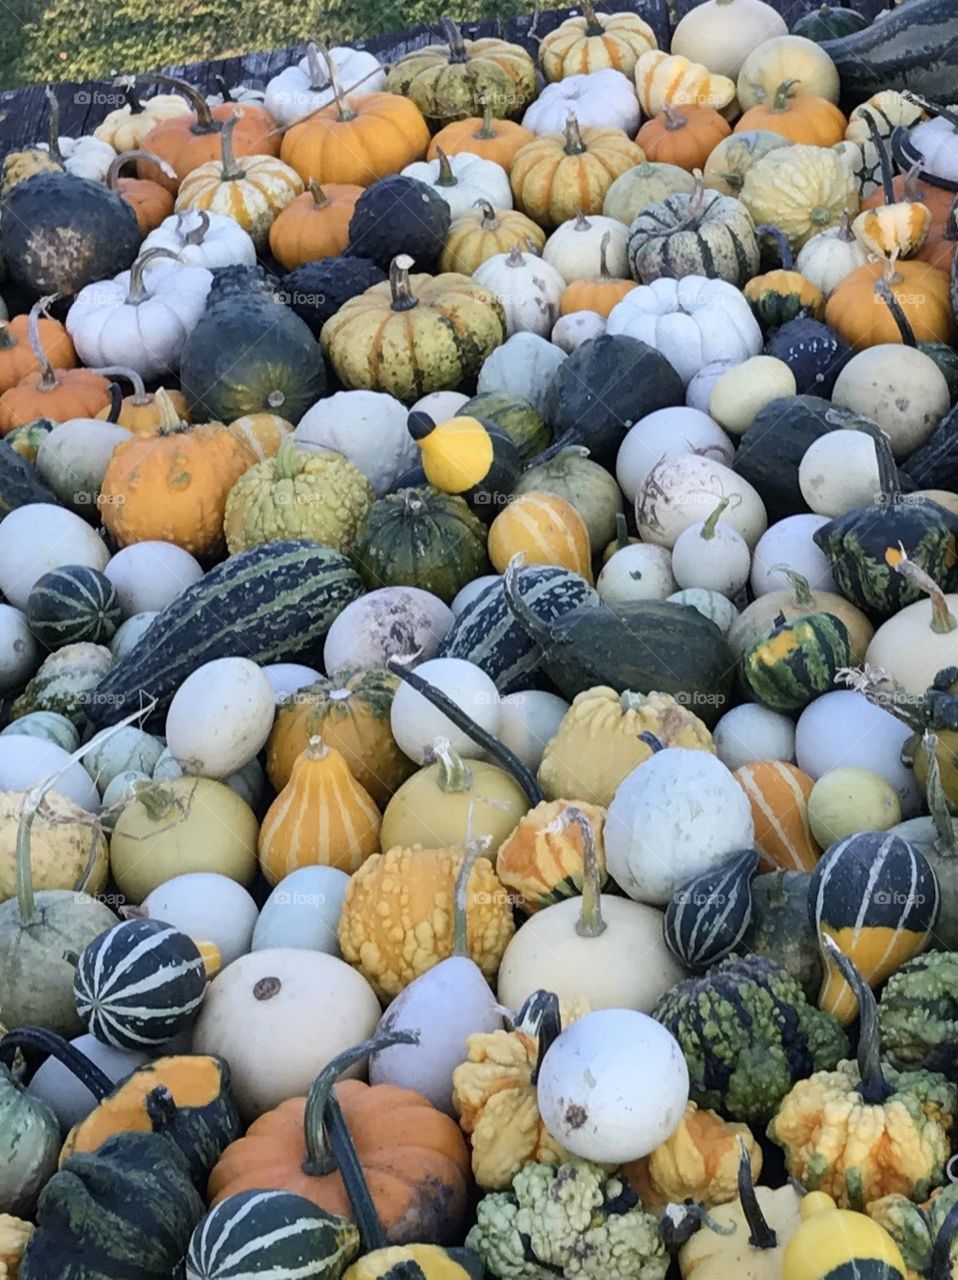 Gourds galore!